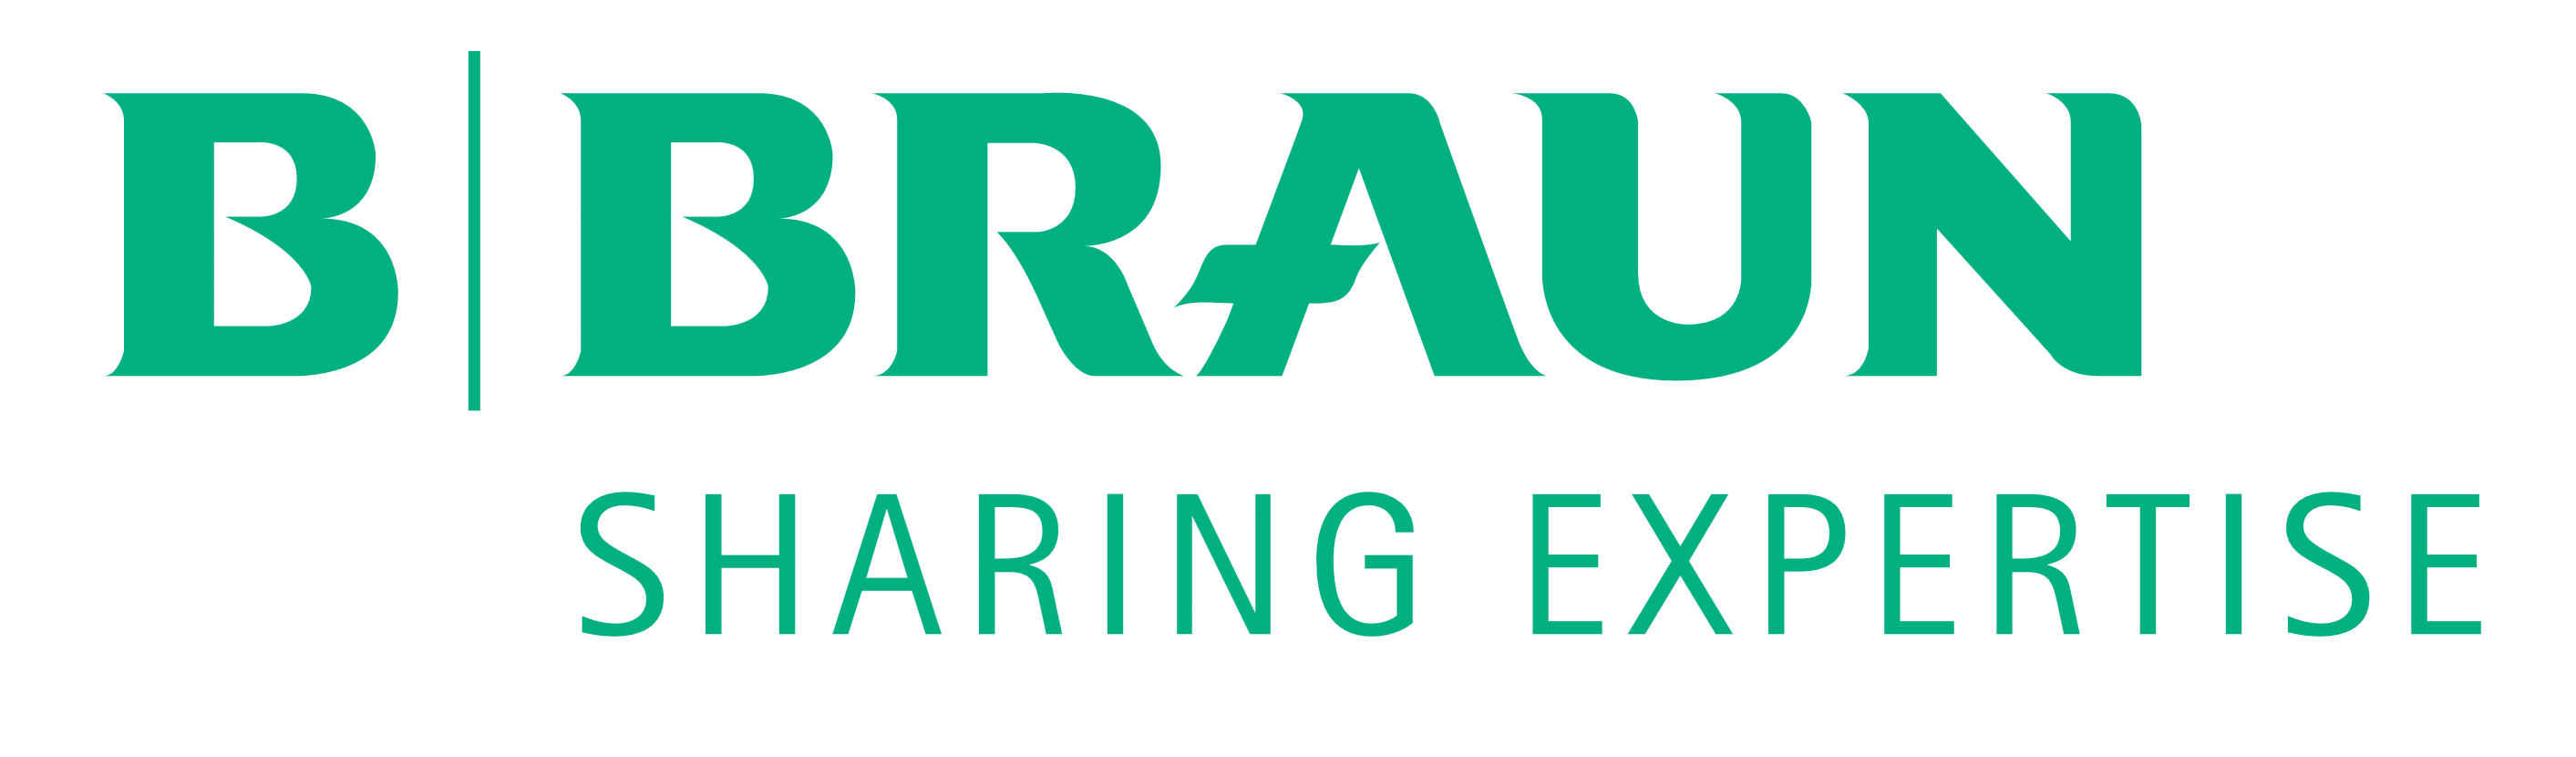 Email: info@bbraun.com Tel: +495661710 Web: www.bbraun.com With over 60,000 employees in 64 countries, B. Braun is one of the world’s leading manufacturers of medical devices and pharmaceutical products and services. Through constructive dialog, B. Braun develops high quality product systems and services that are both evolving and progressive - and in turn improves people’s health around the world.